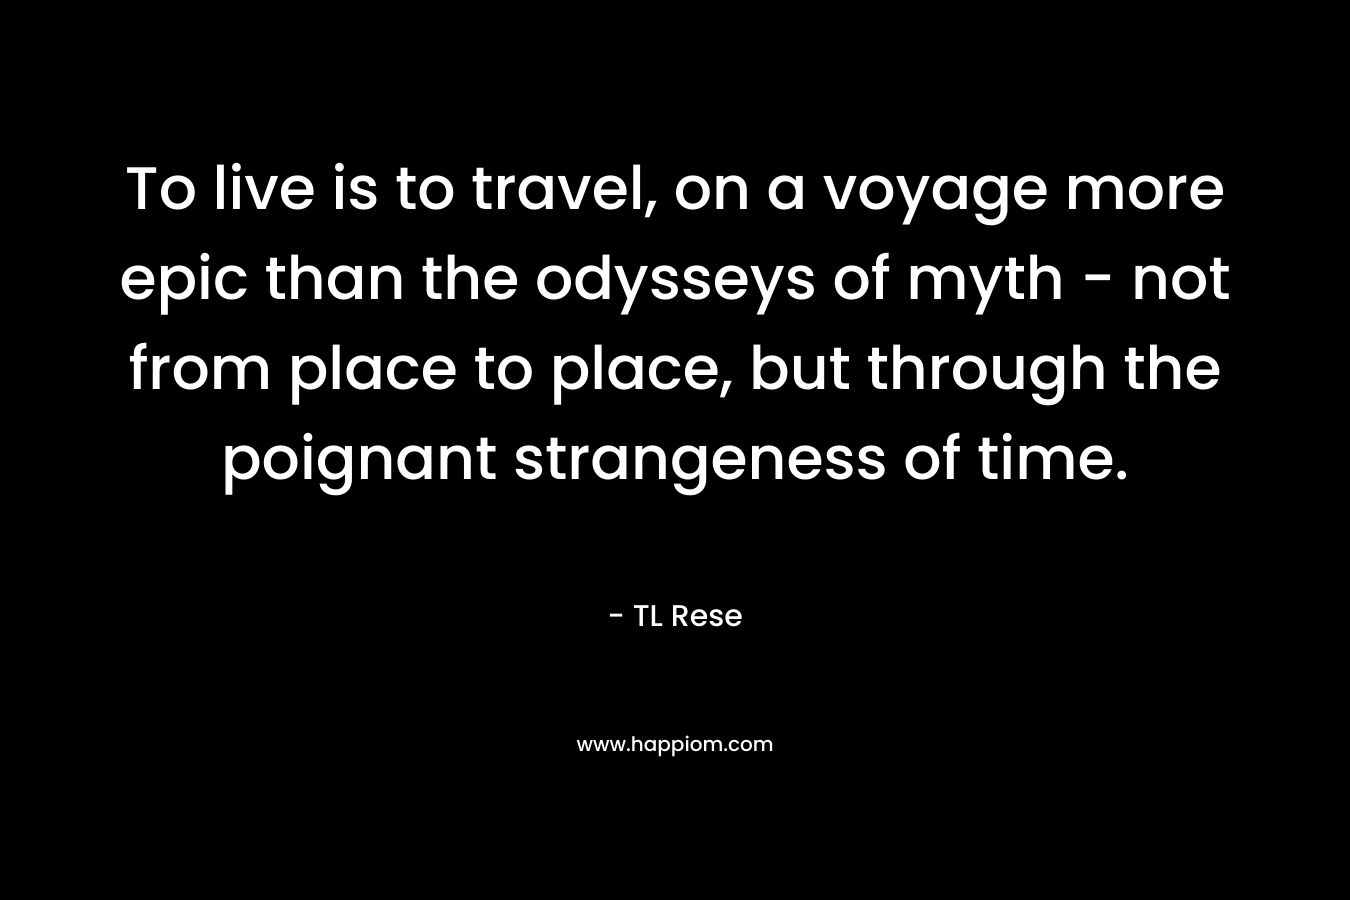 To live is to travel, on a voyage more epic than the odysseys of myth – not from place to place, but through the poignant strangeness of time. – TL Rese